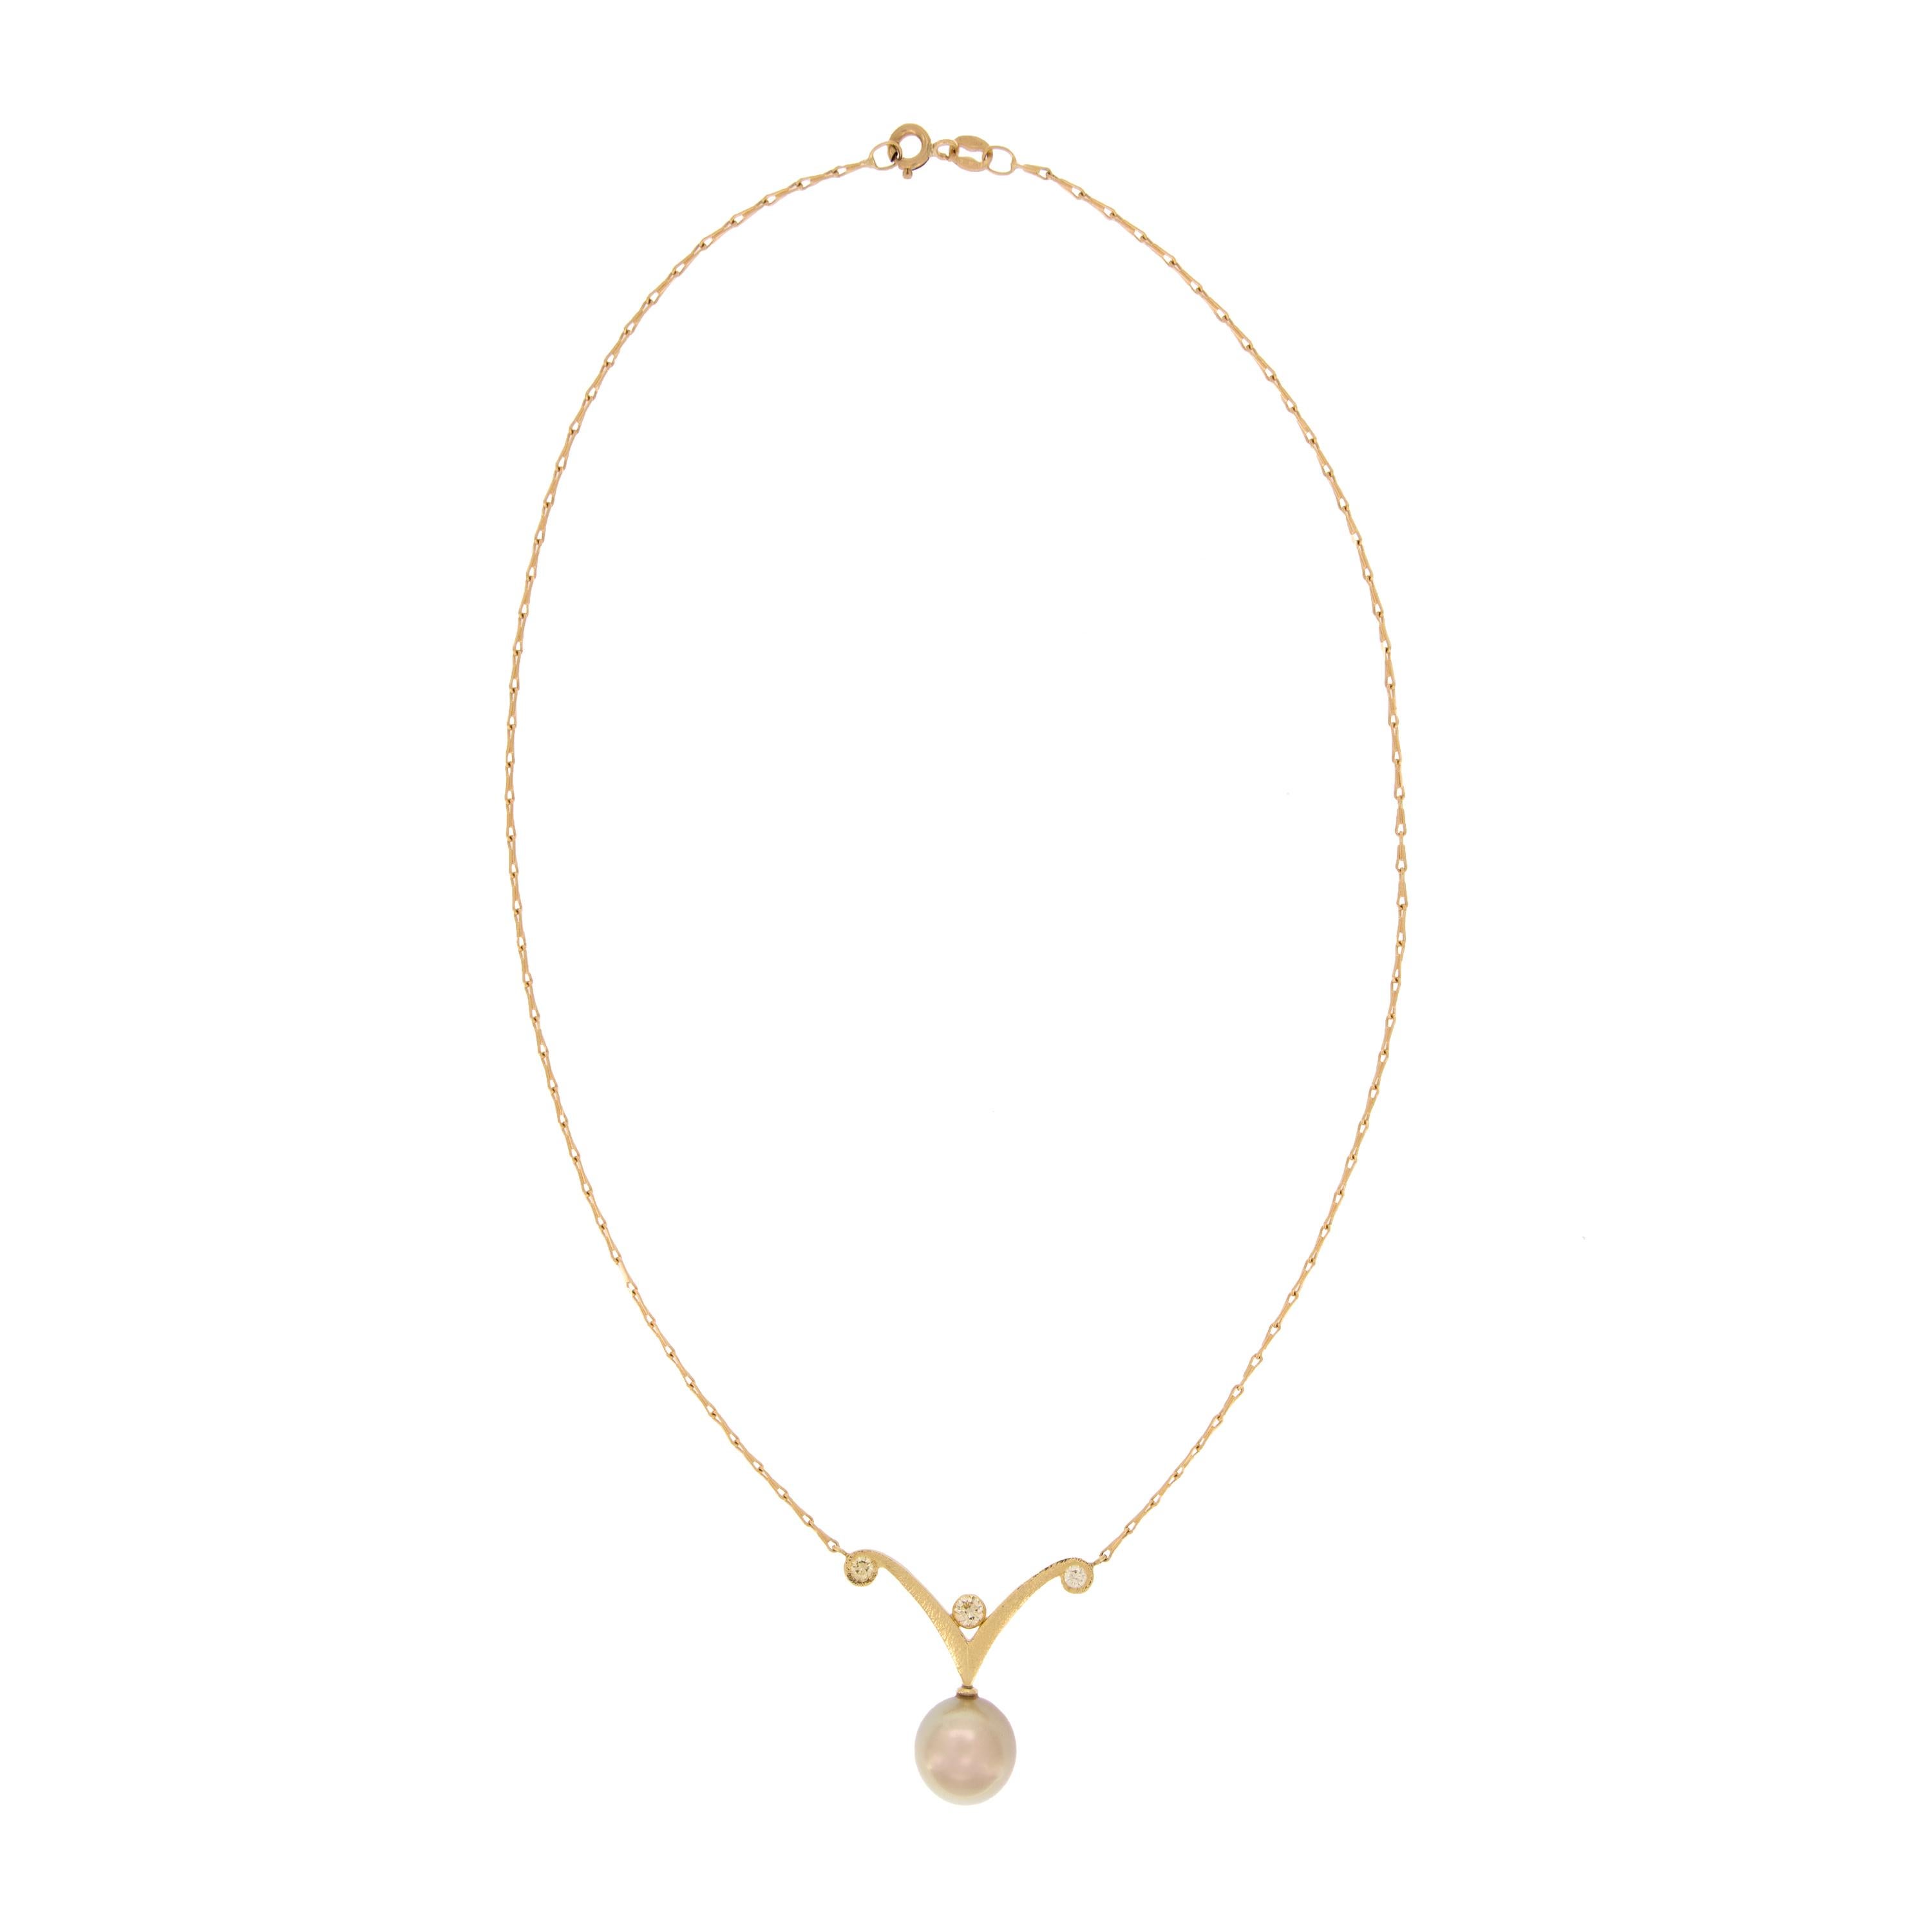 A simple scroll design pearl and diamond necklace features a golden 11.3 mm pearl with rose' overtones and is suspended from a 16 inch 18k yellow gold barleycorn chain. Pendant measures 1.25